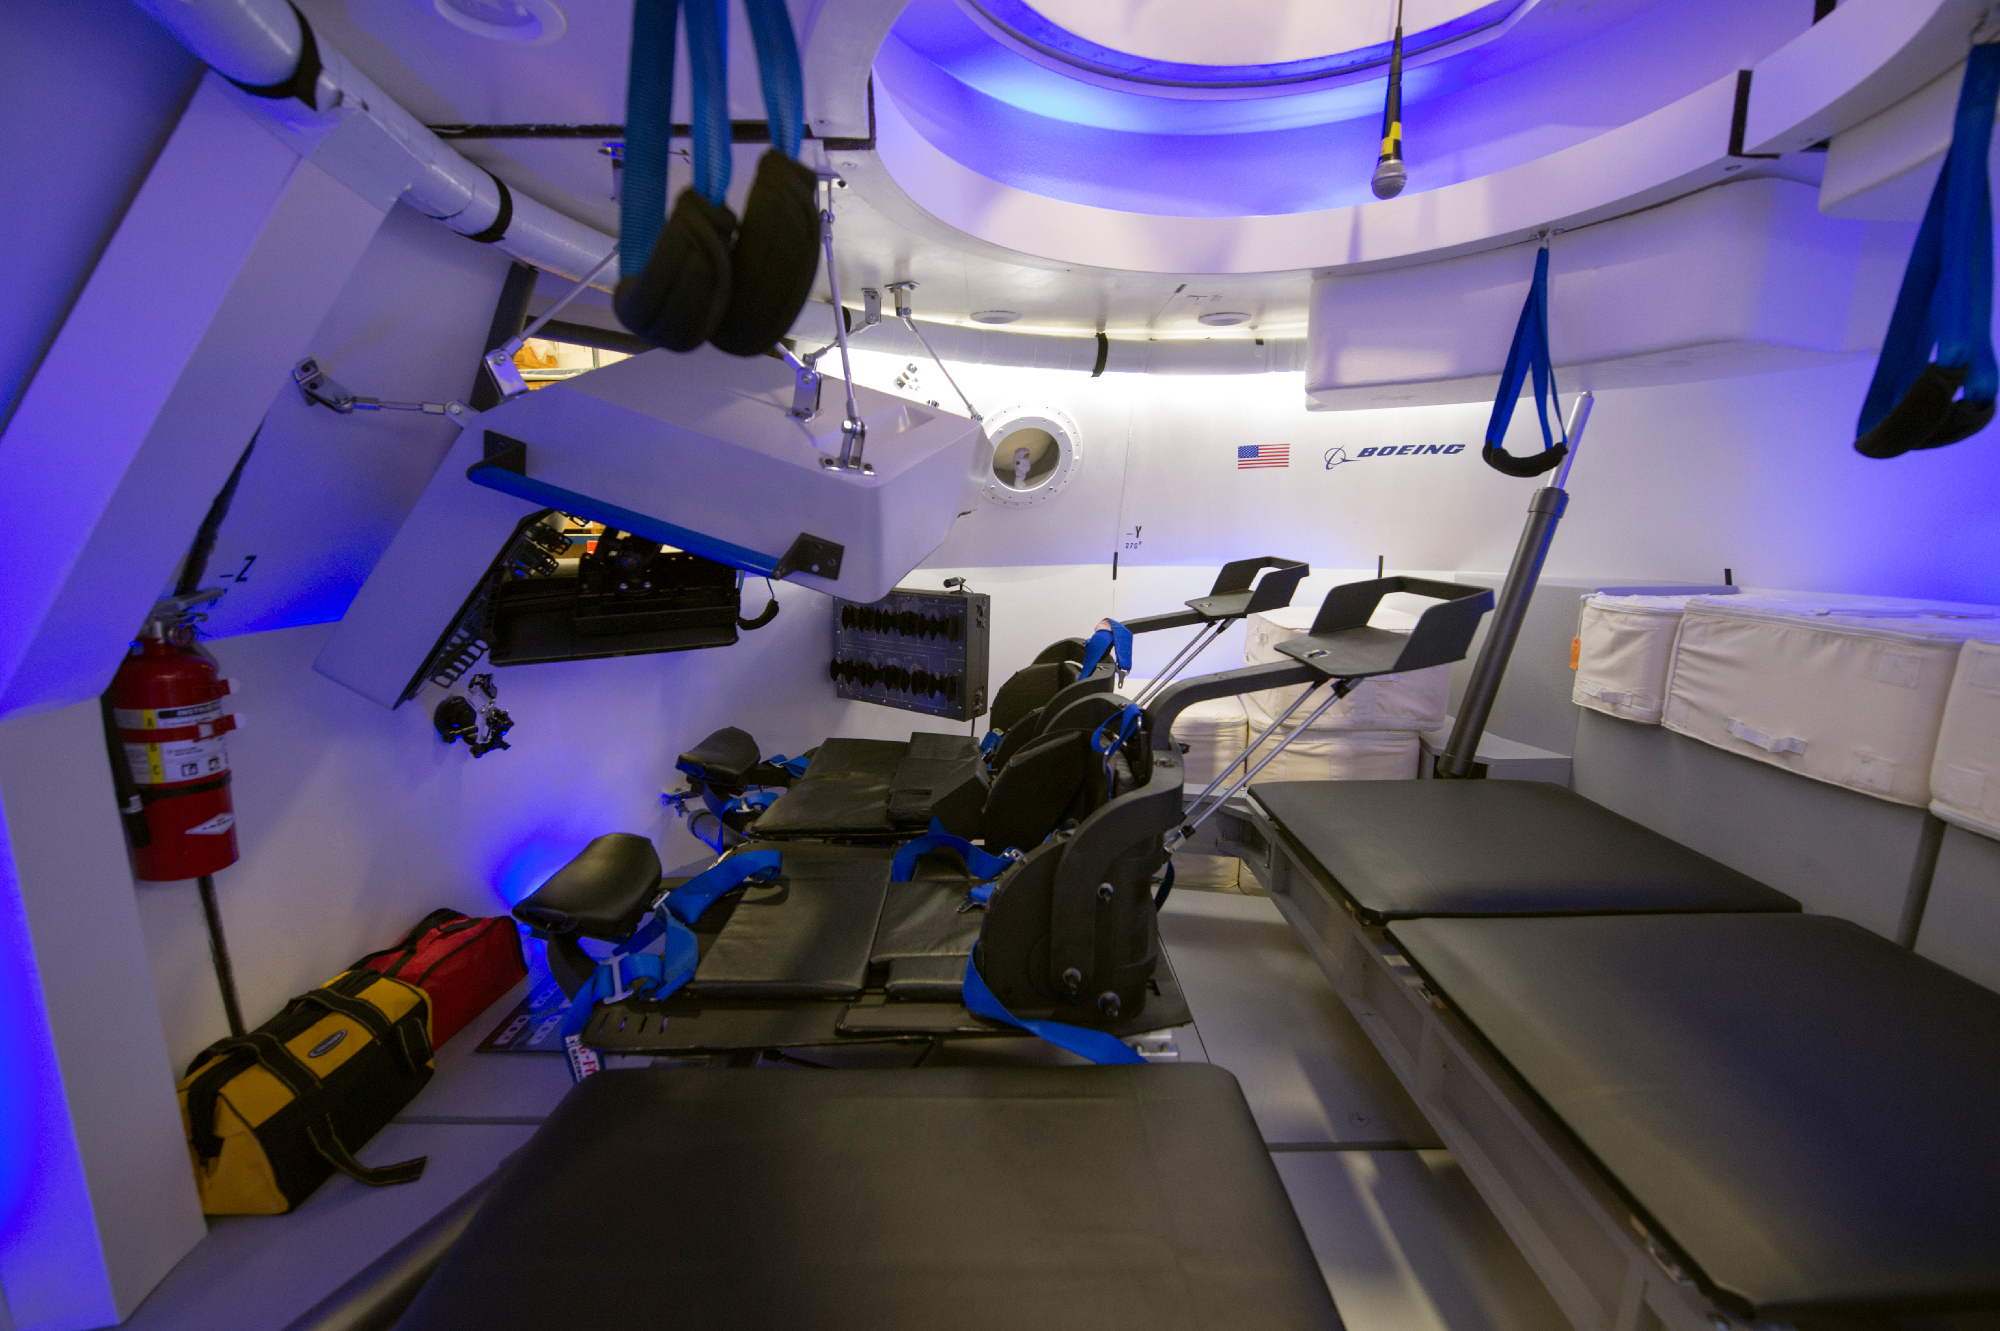 Boeing’s New Space Taxi Has The Cleanest Cabin On Earth